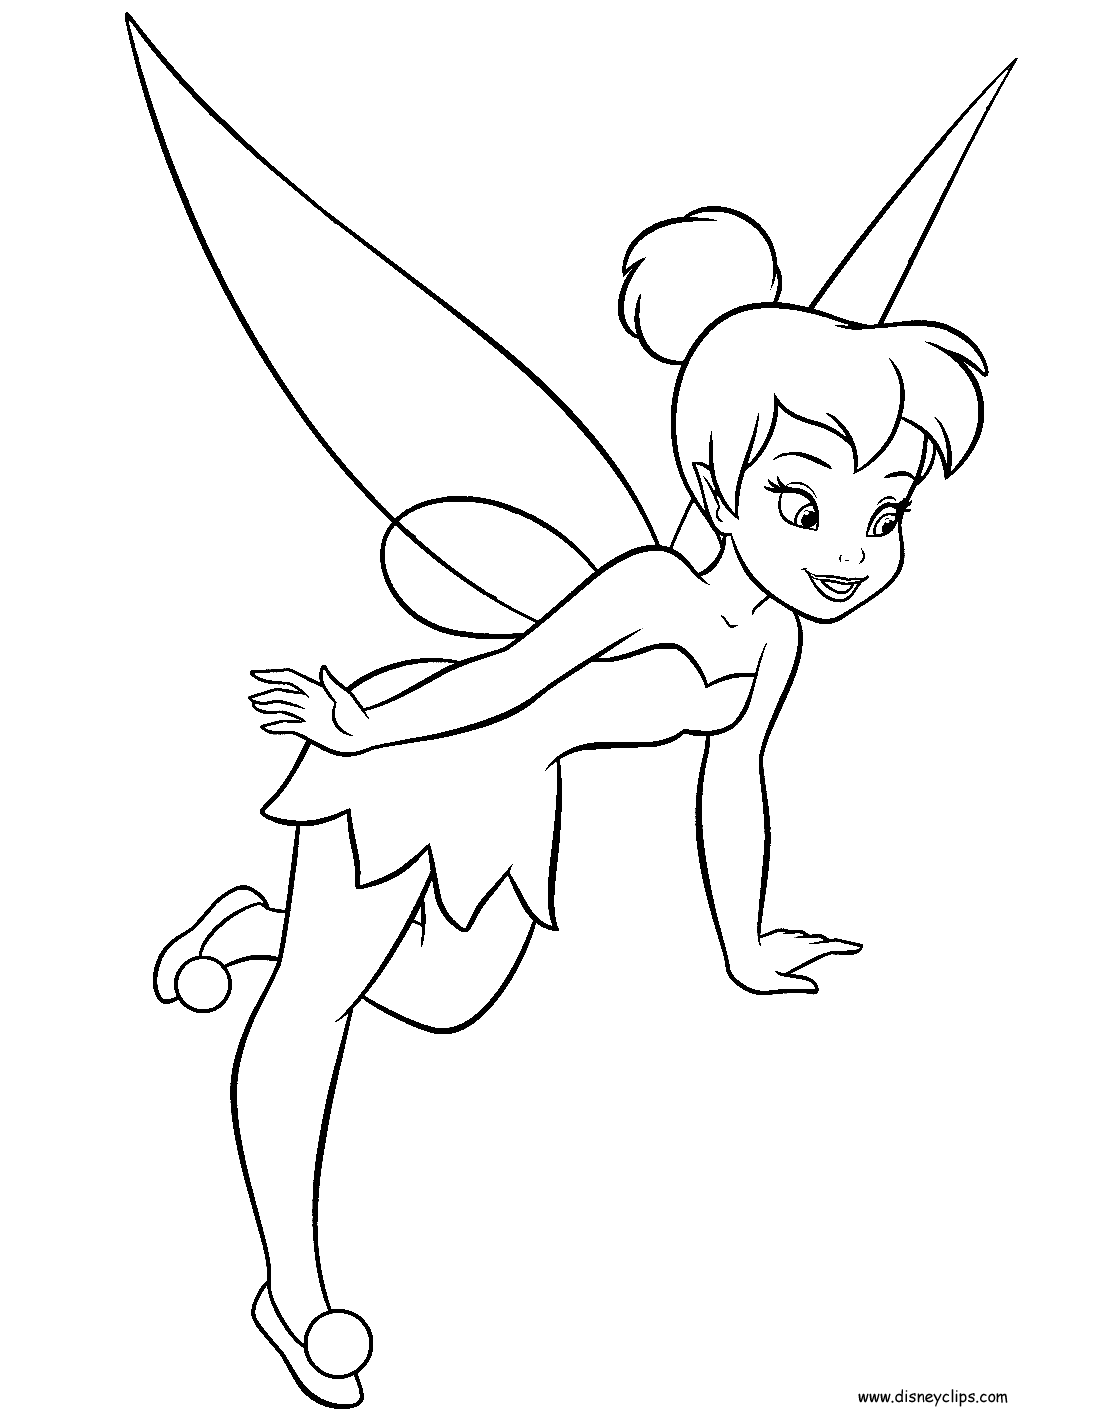 Download Disney Fairies' Tinker Bell Coloring Pages | Disneyclips.com